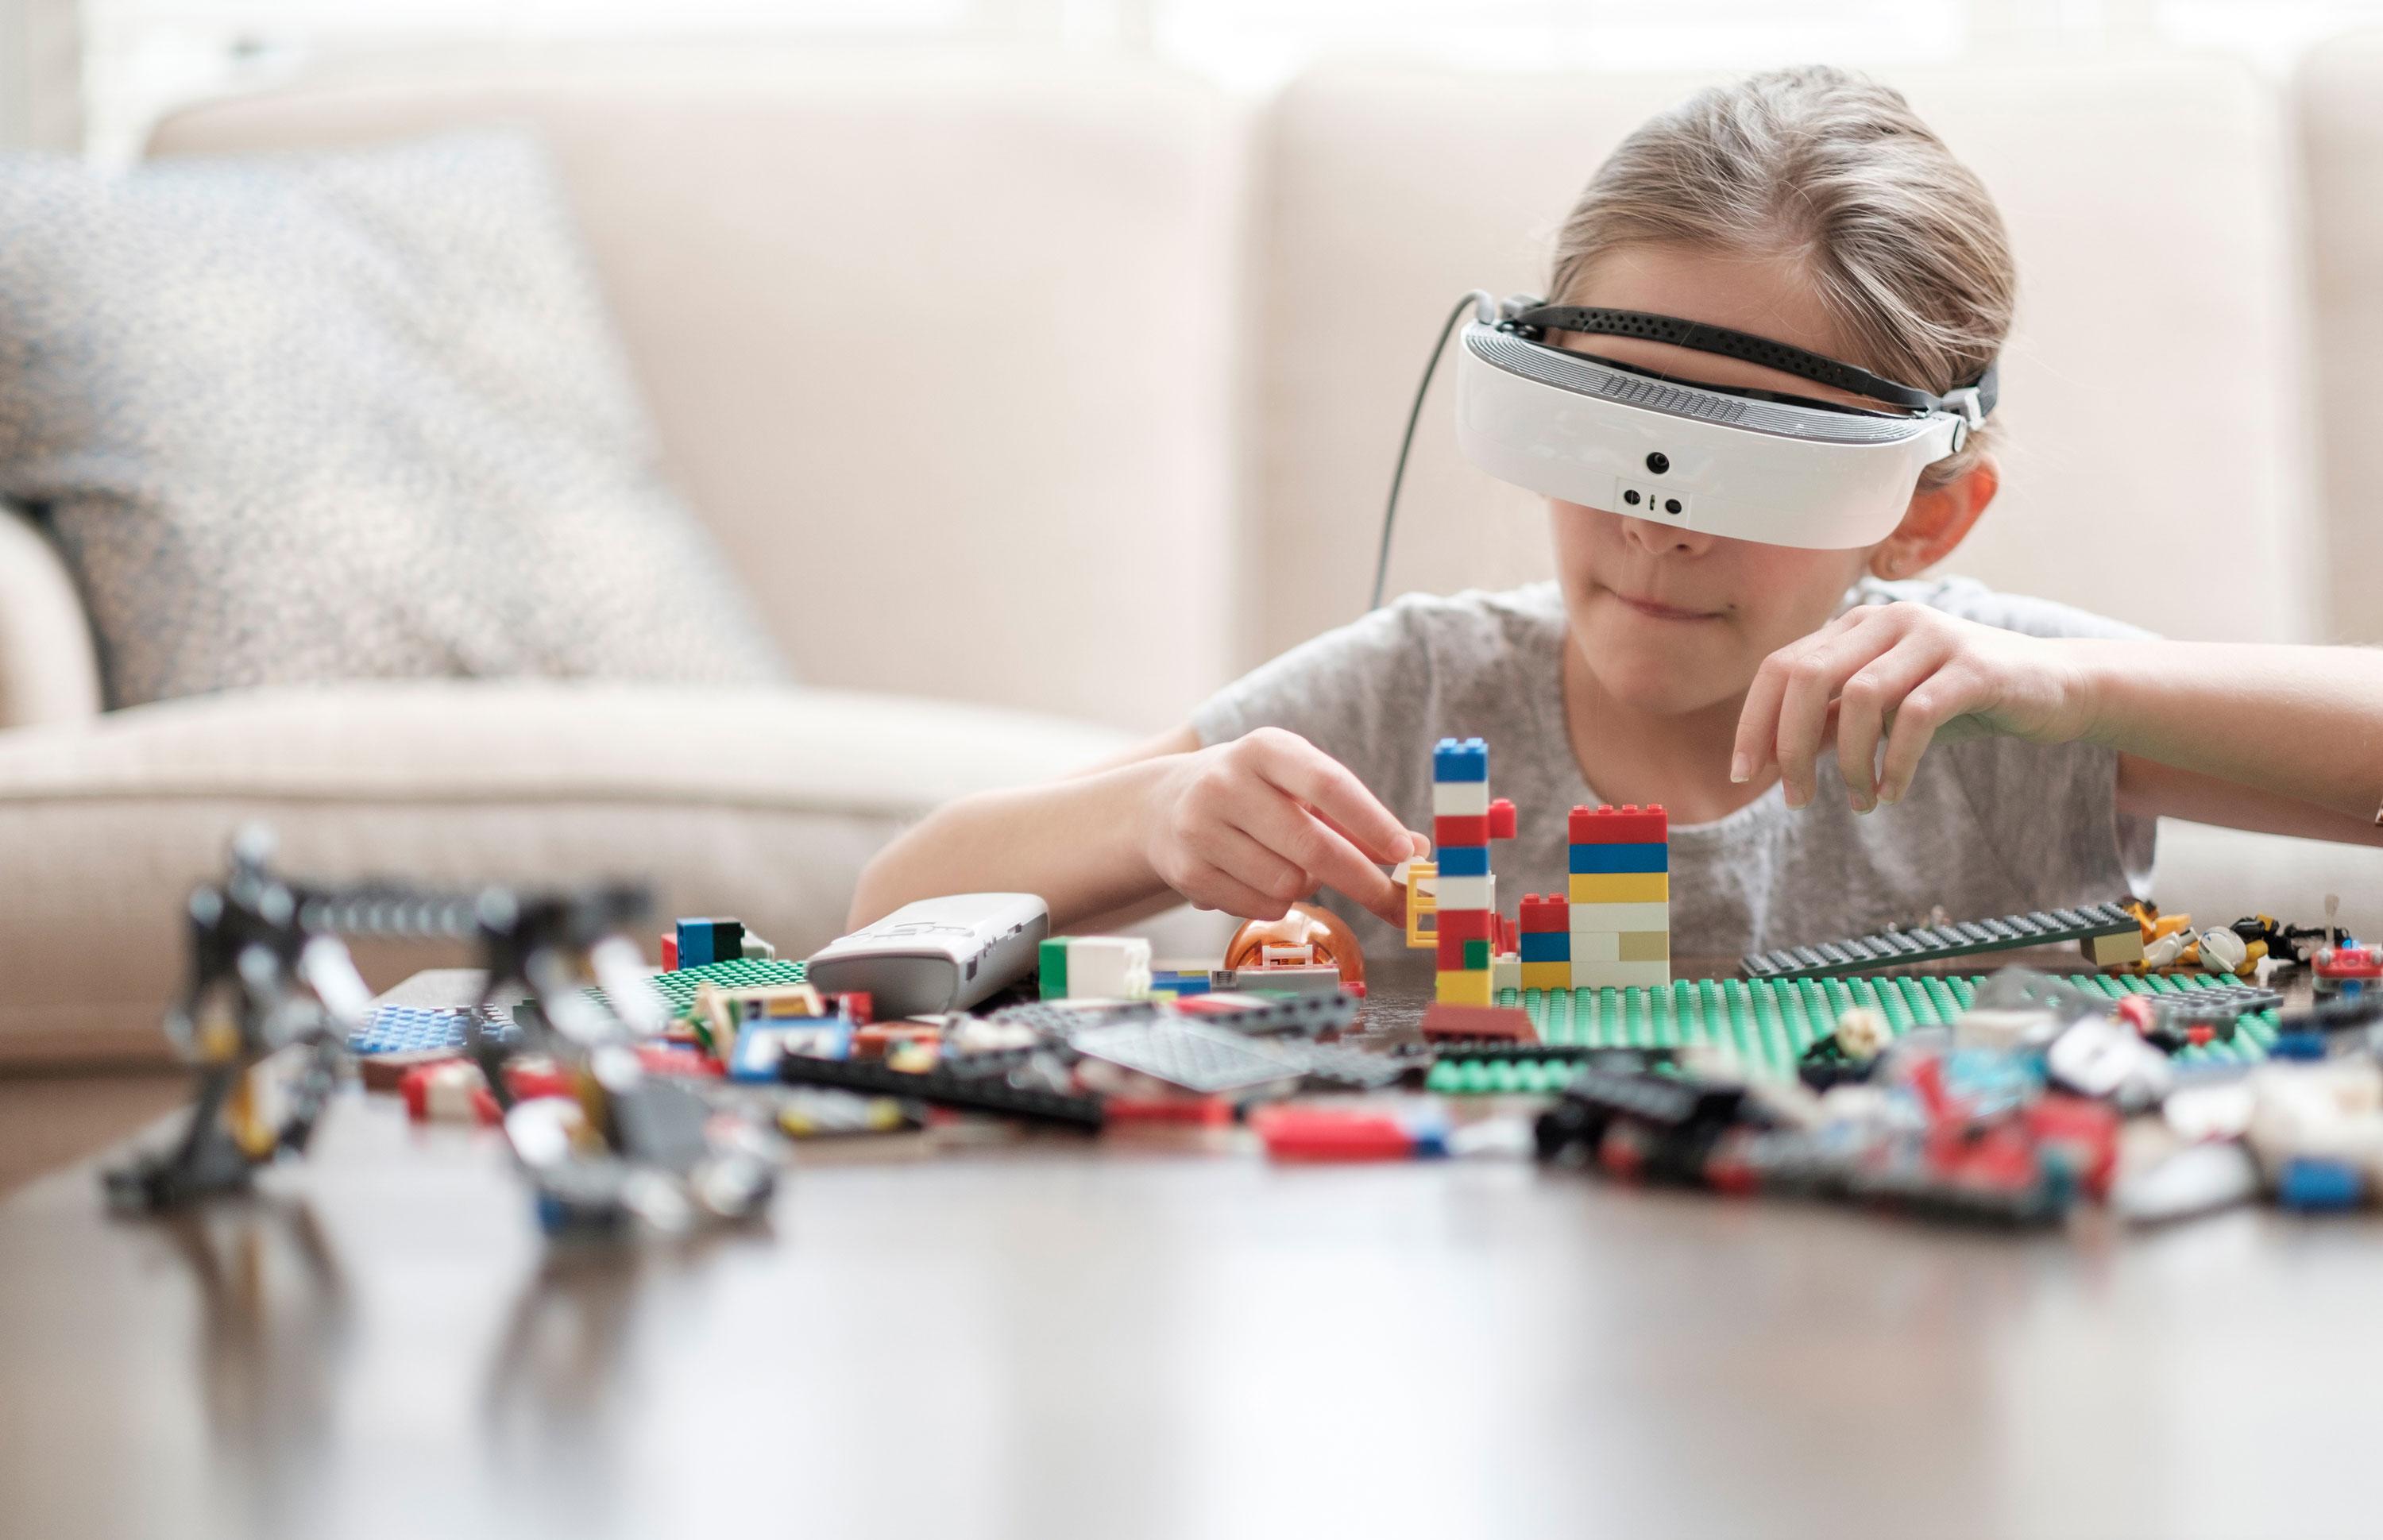 A child wearing eSight and using it to build Lego